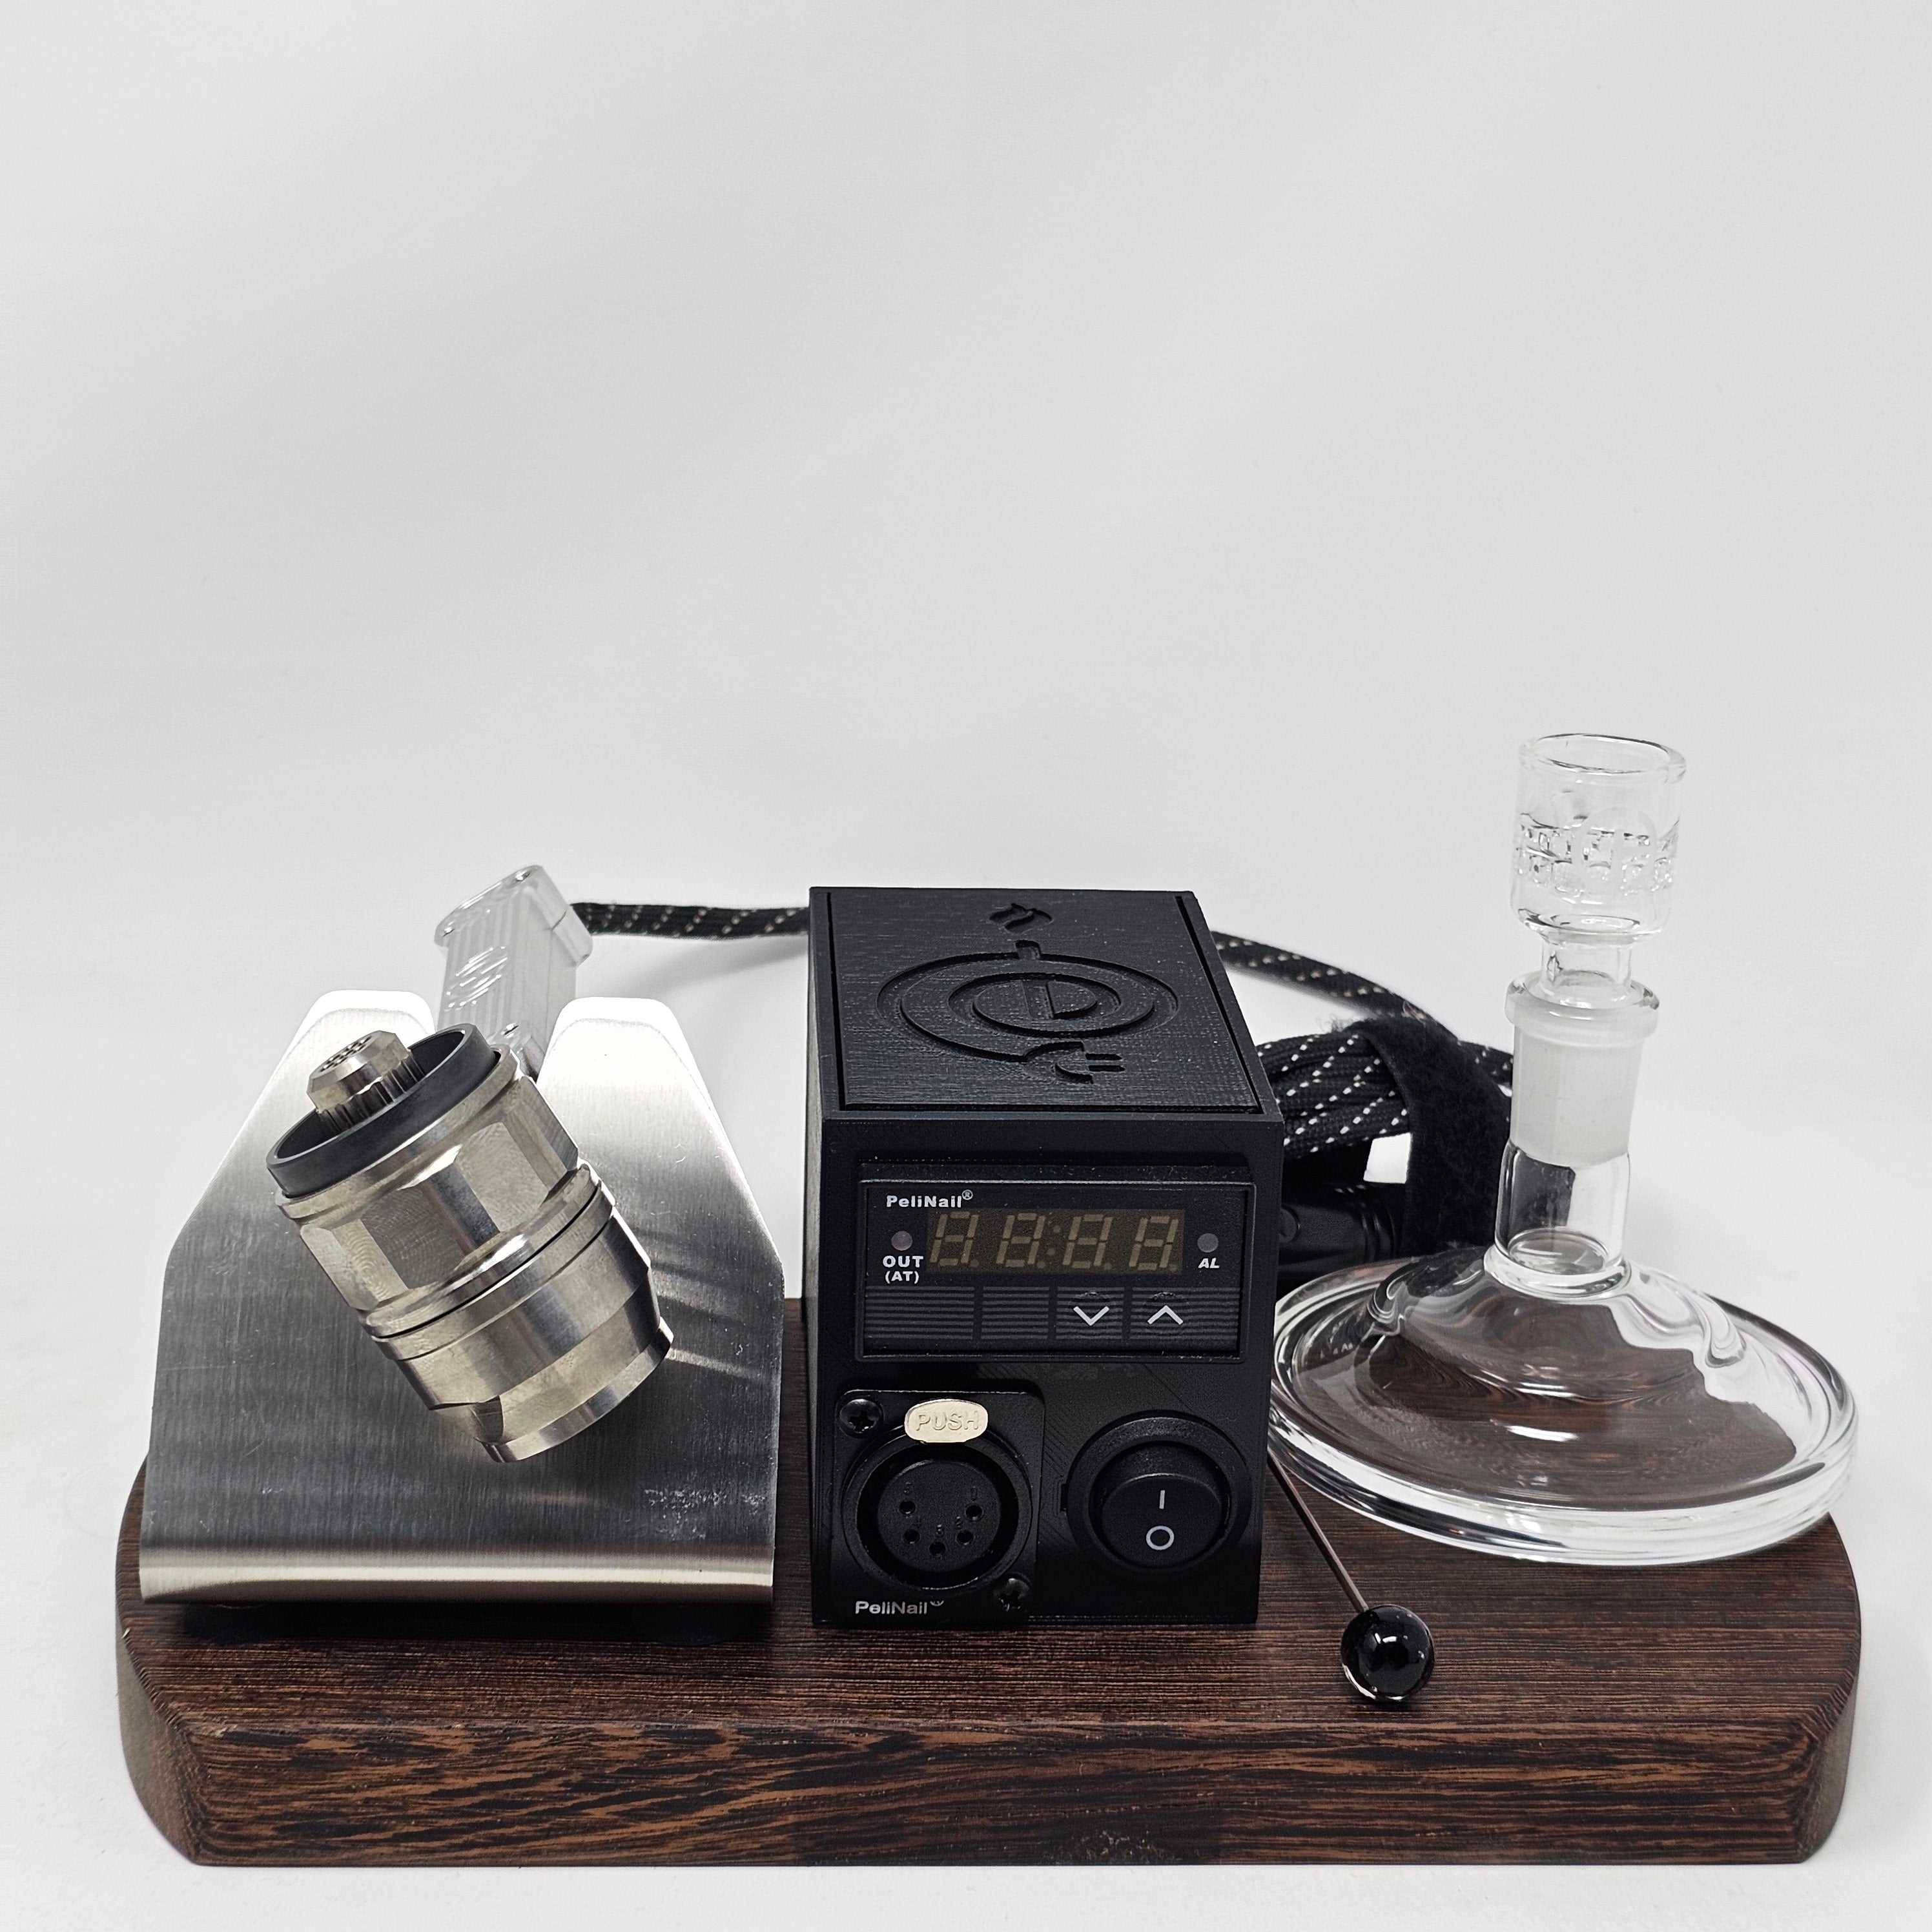 Portable Enail Dab Kit for Sale | Only $89.98 – INHALCO